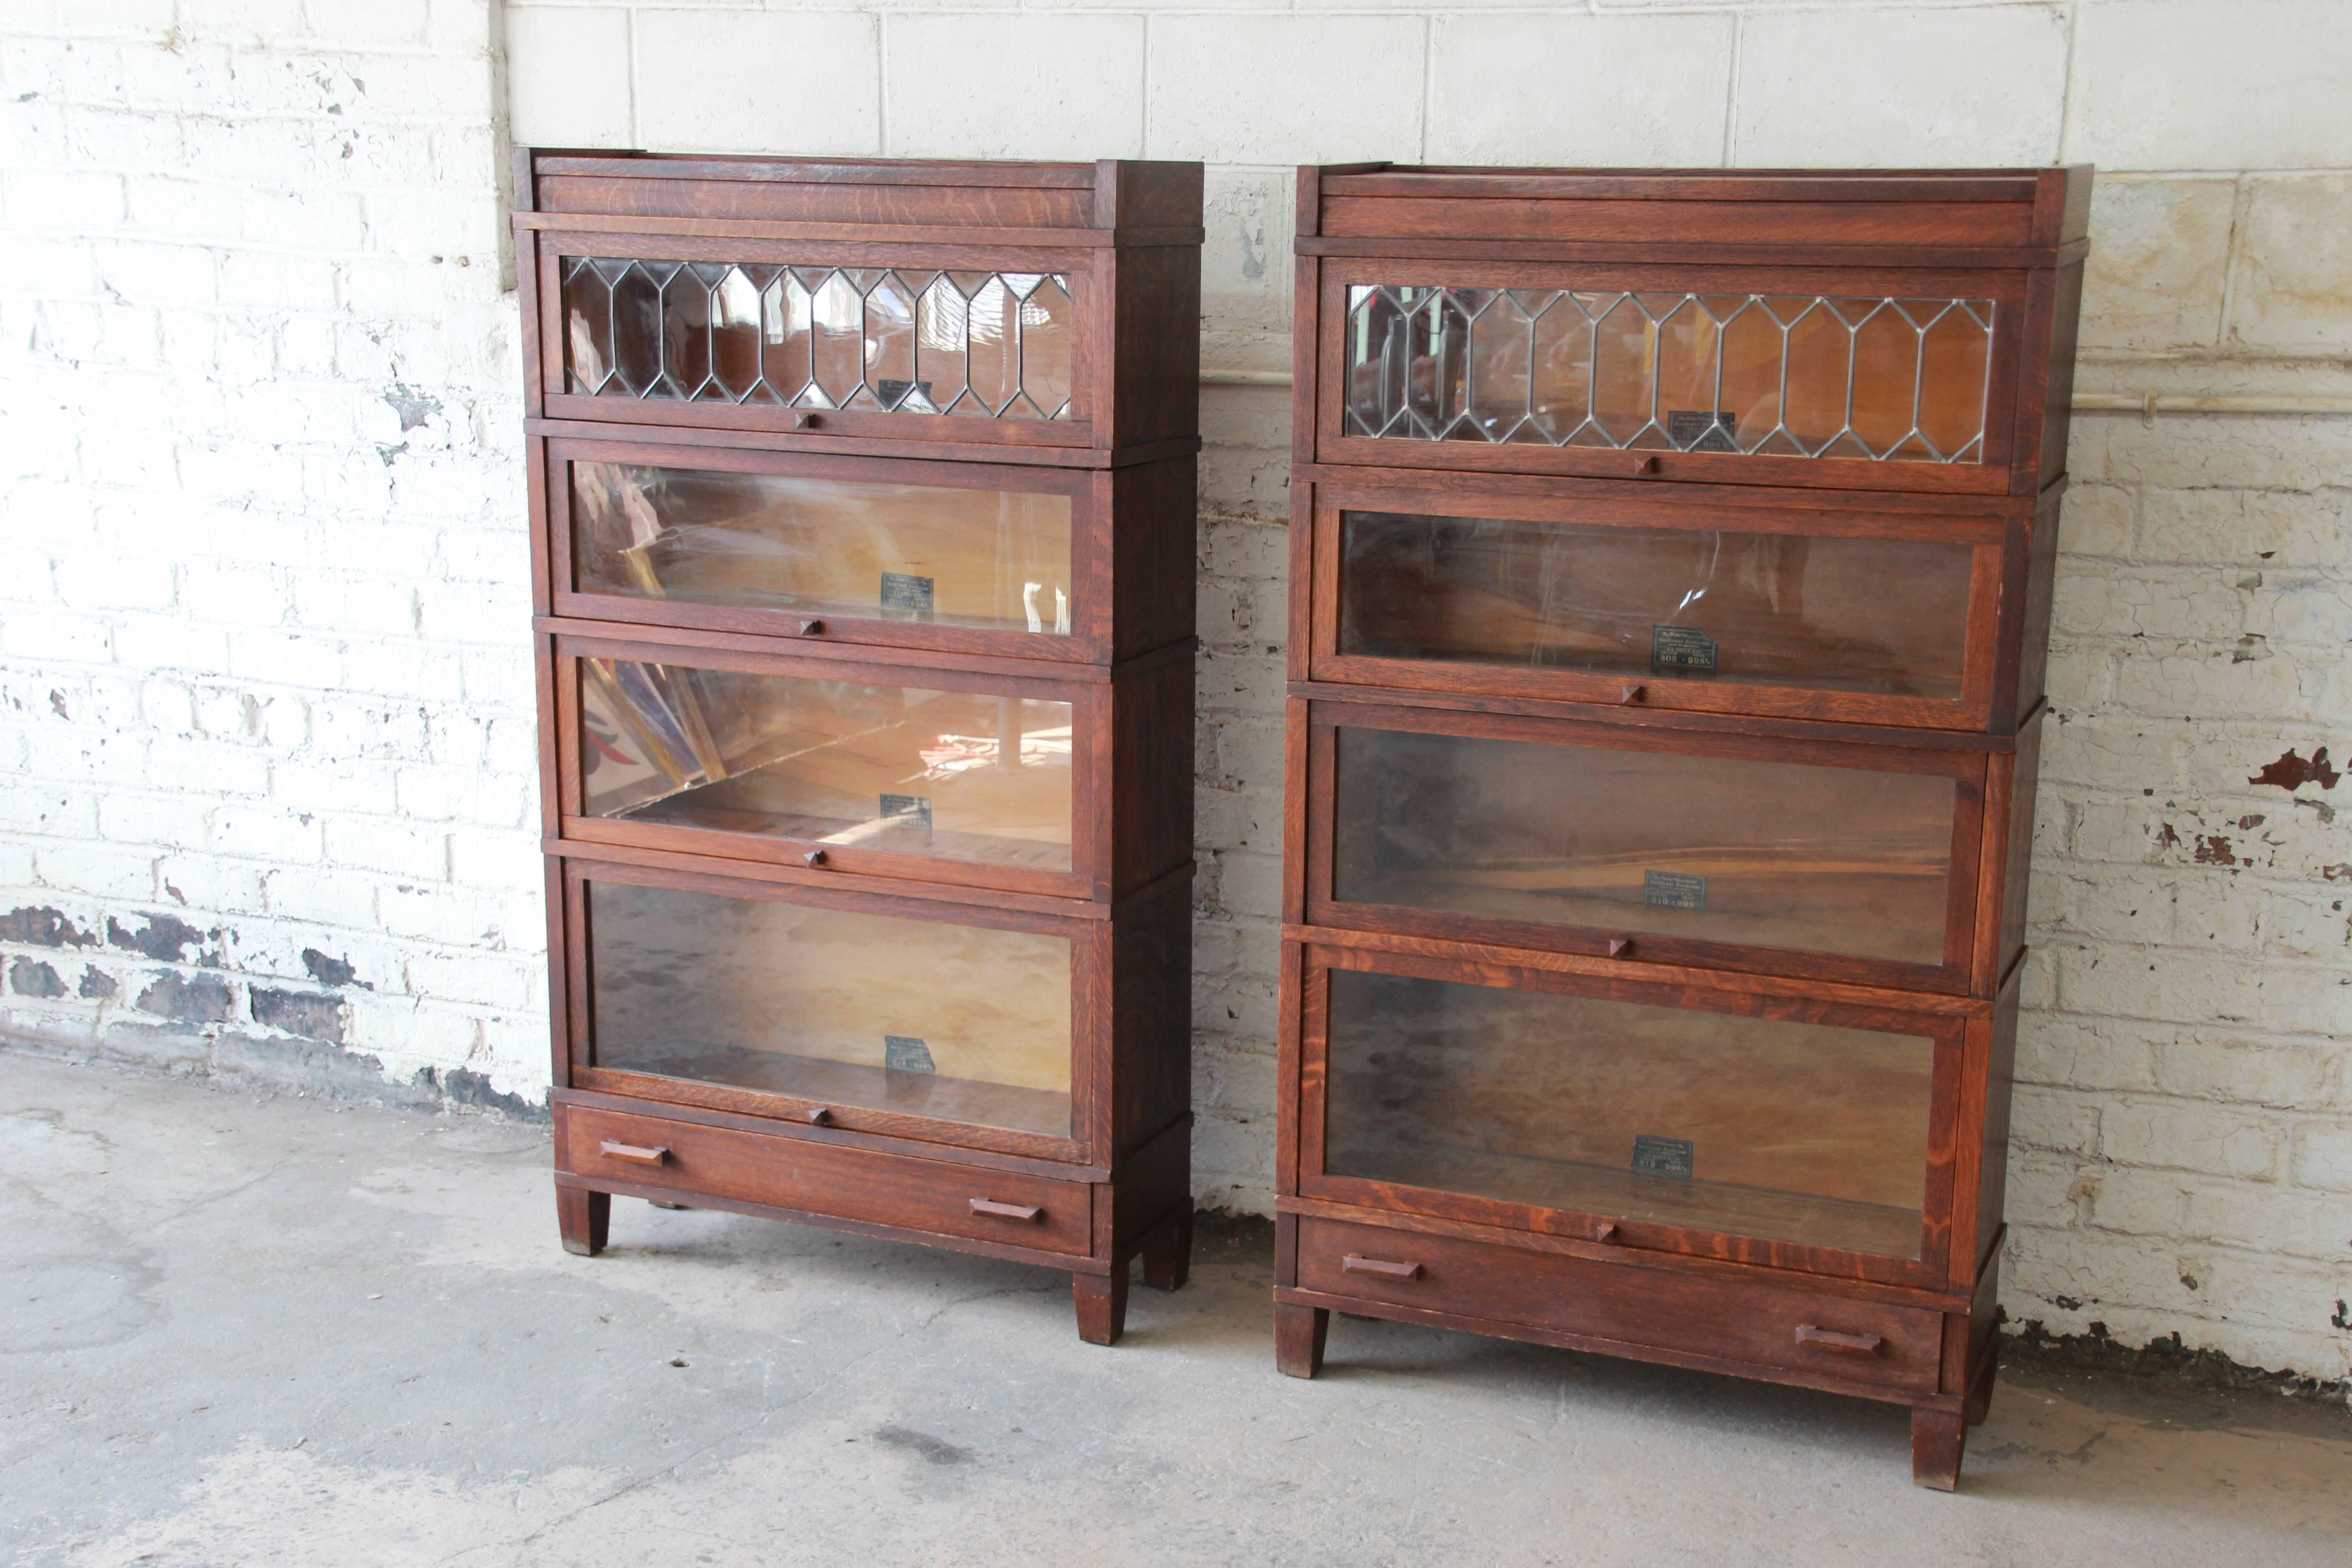 An outstanding pair of antique oak barrister bookcases by Globe-Wernicke. The bookcases feature gorgeous quarter sawn tiger oakwood grain and a nice Arts & Crafts design. The top glass door on each case has a beautiful leaded glass front with a